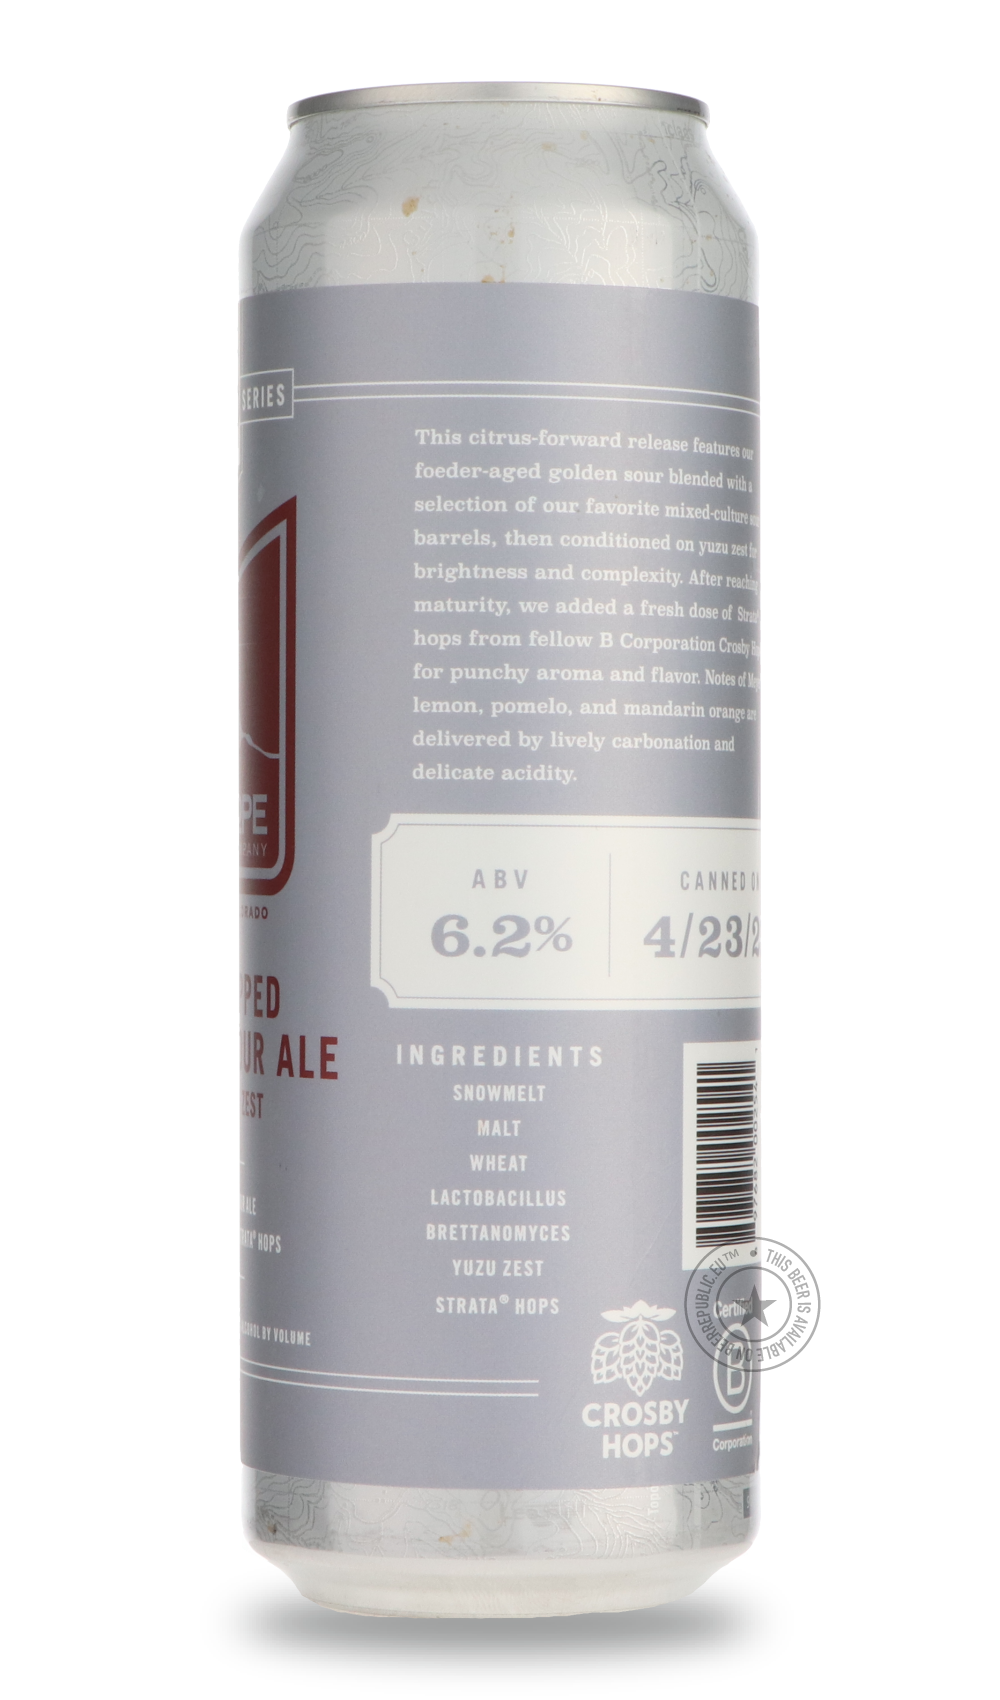 -Upslope- Lee Hill Vol. 28 Dry-Hopped Golden Sour Ale-Sour / Wild & Fruity- Only @ Beer Republic - The best online beer store for American & Canadian craft beer - Buy beer online from the USA and Canada - Bier online kopen - Amerikaans bier kopen - Craft beer store - Craft beer kopen - Amerikanisch bier kaufen - Bier online kaufen - Acheter biere online - IPA - Stout - Porter - New England IPA - Hazy IPA - Imperial Stout - Barrel Aged - Barrel Aged Imperial Stout - Brown - Dark beer - Blond - Blonde - Pilsn